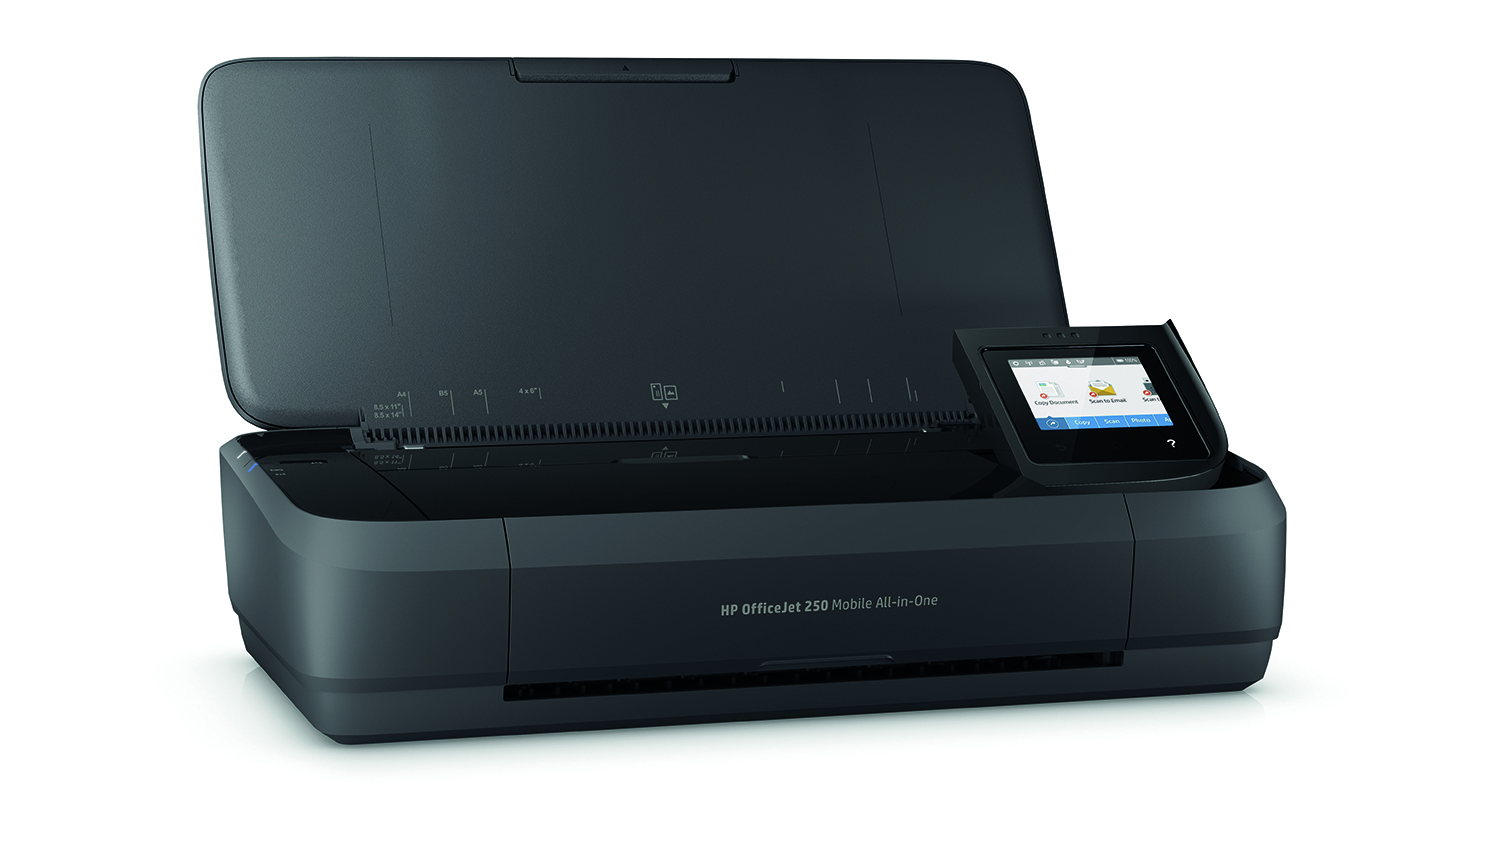 HP OfficeJet 250 Mobile All-in-One | ITPro